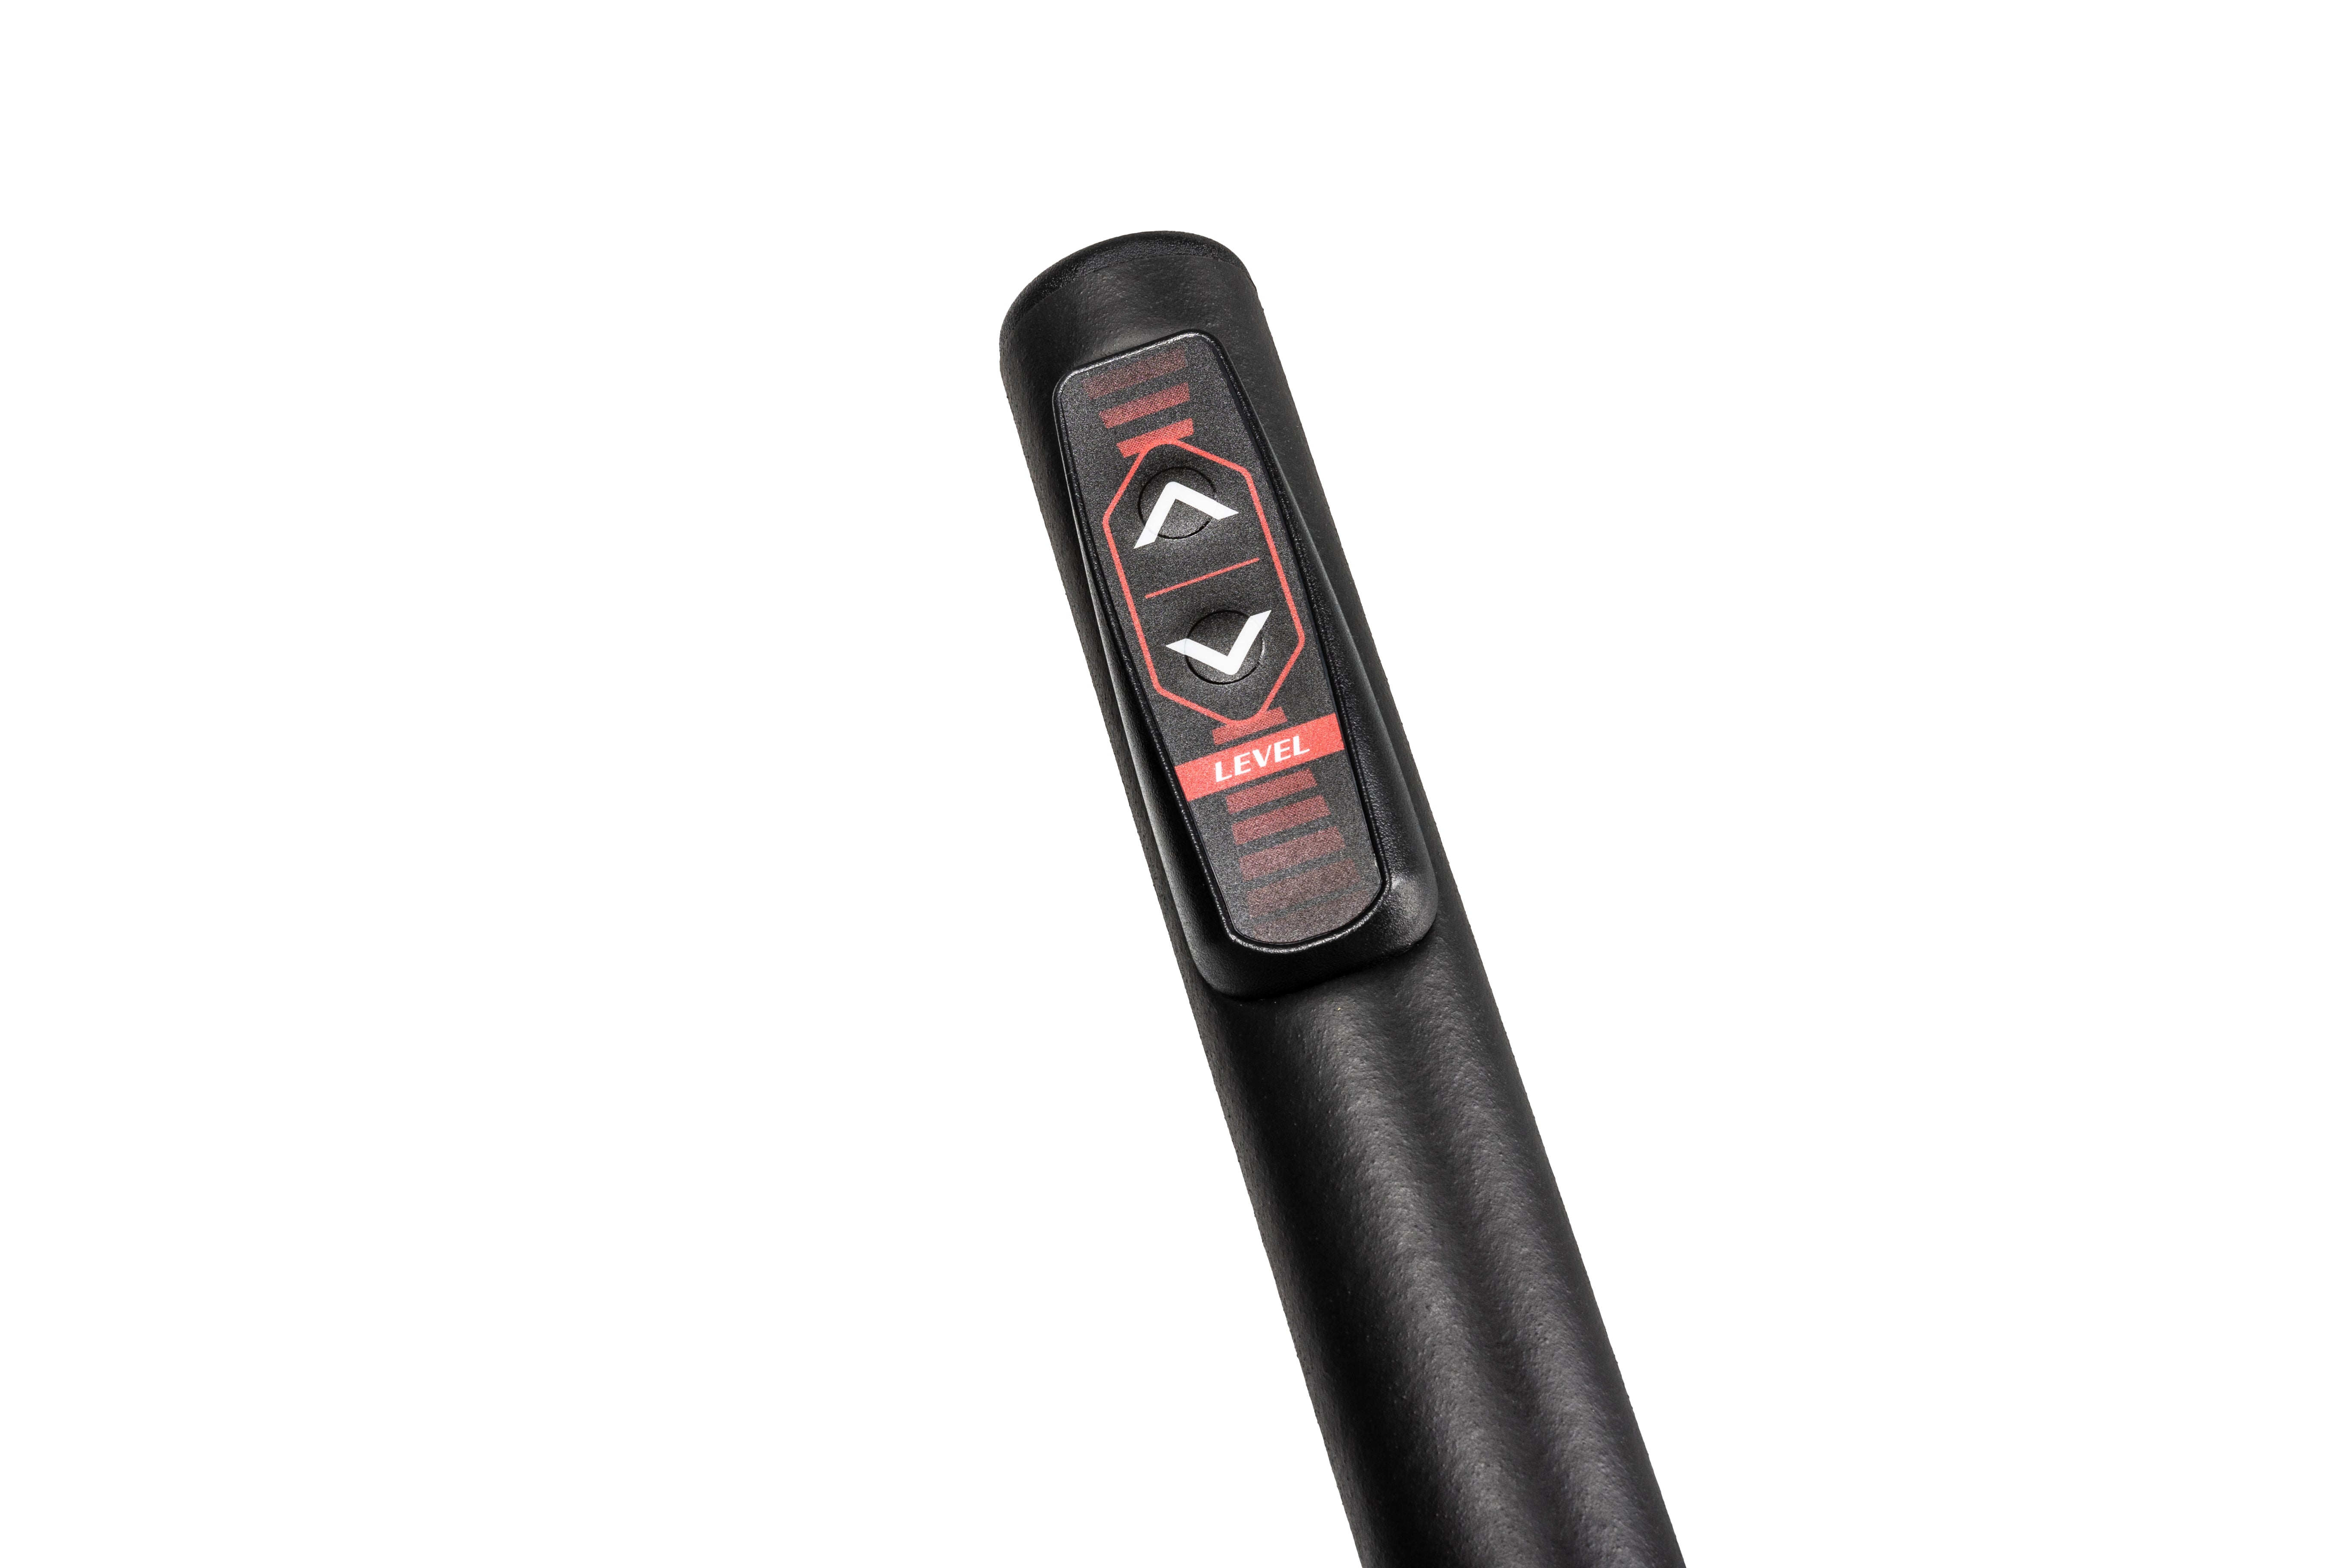 Close-up of the handlebar on the Sole E25 elliptical trainer, featuring the red and black 'LEVEL' control buttons with up and down arrows, set on a smooth black surface.